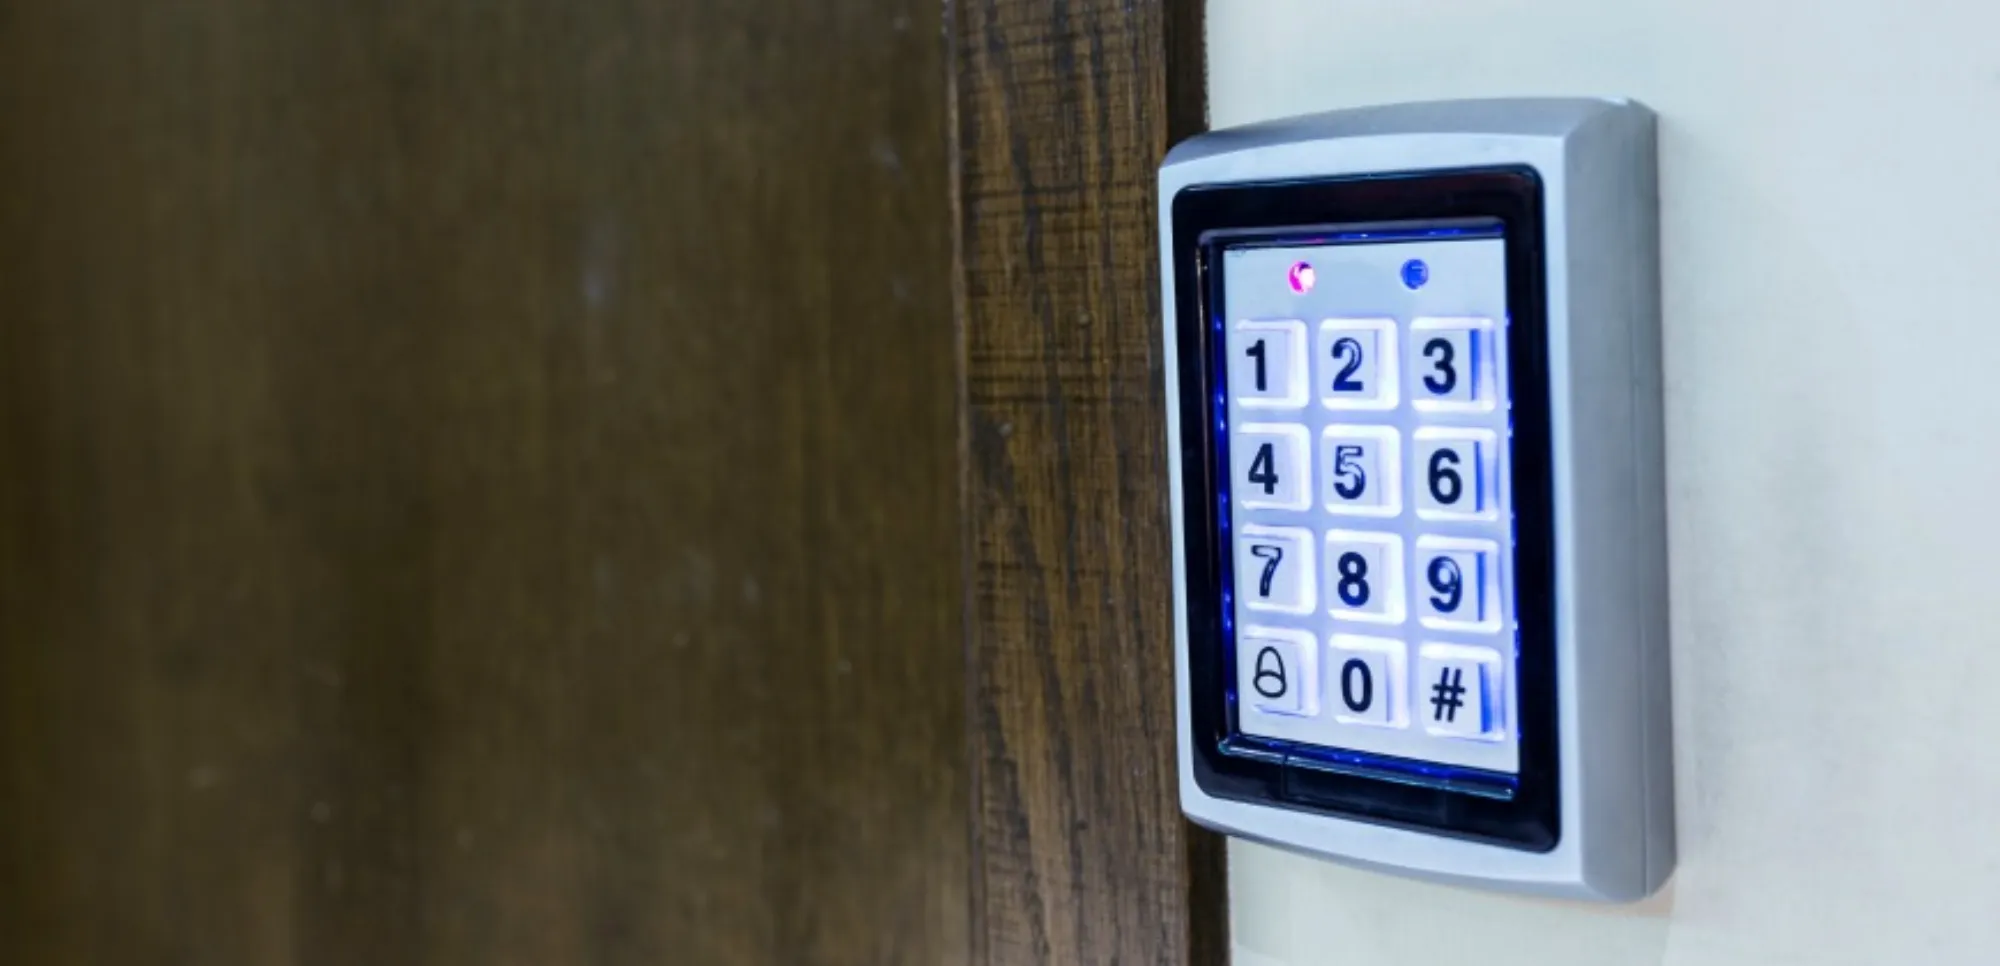 Nelson Bays Security - Control all your internal and external doors with door access control systems